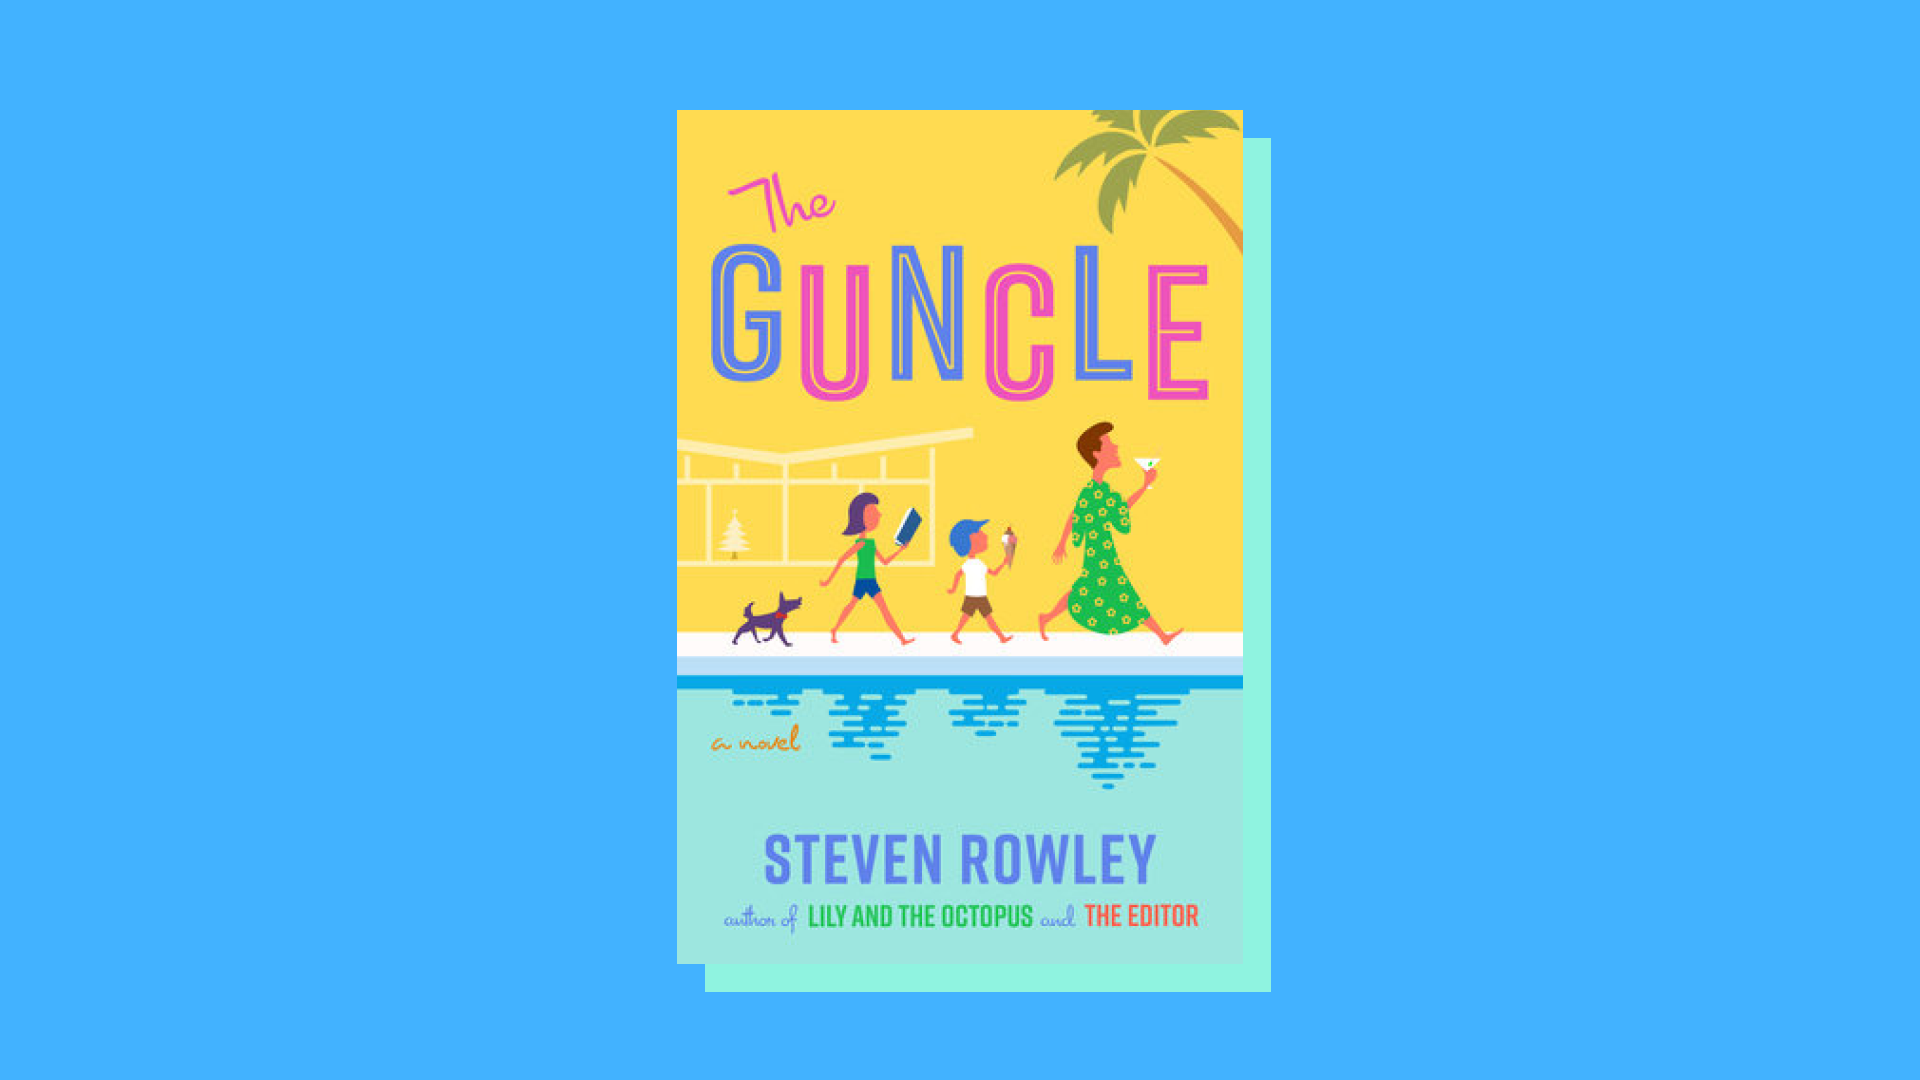 “The Guncle” by Steven Rowley